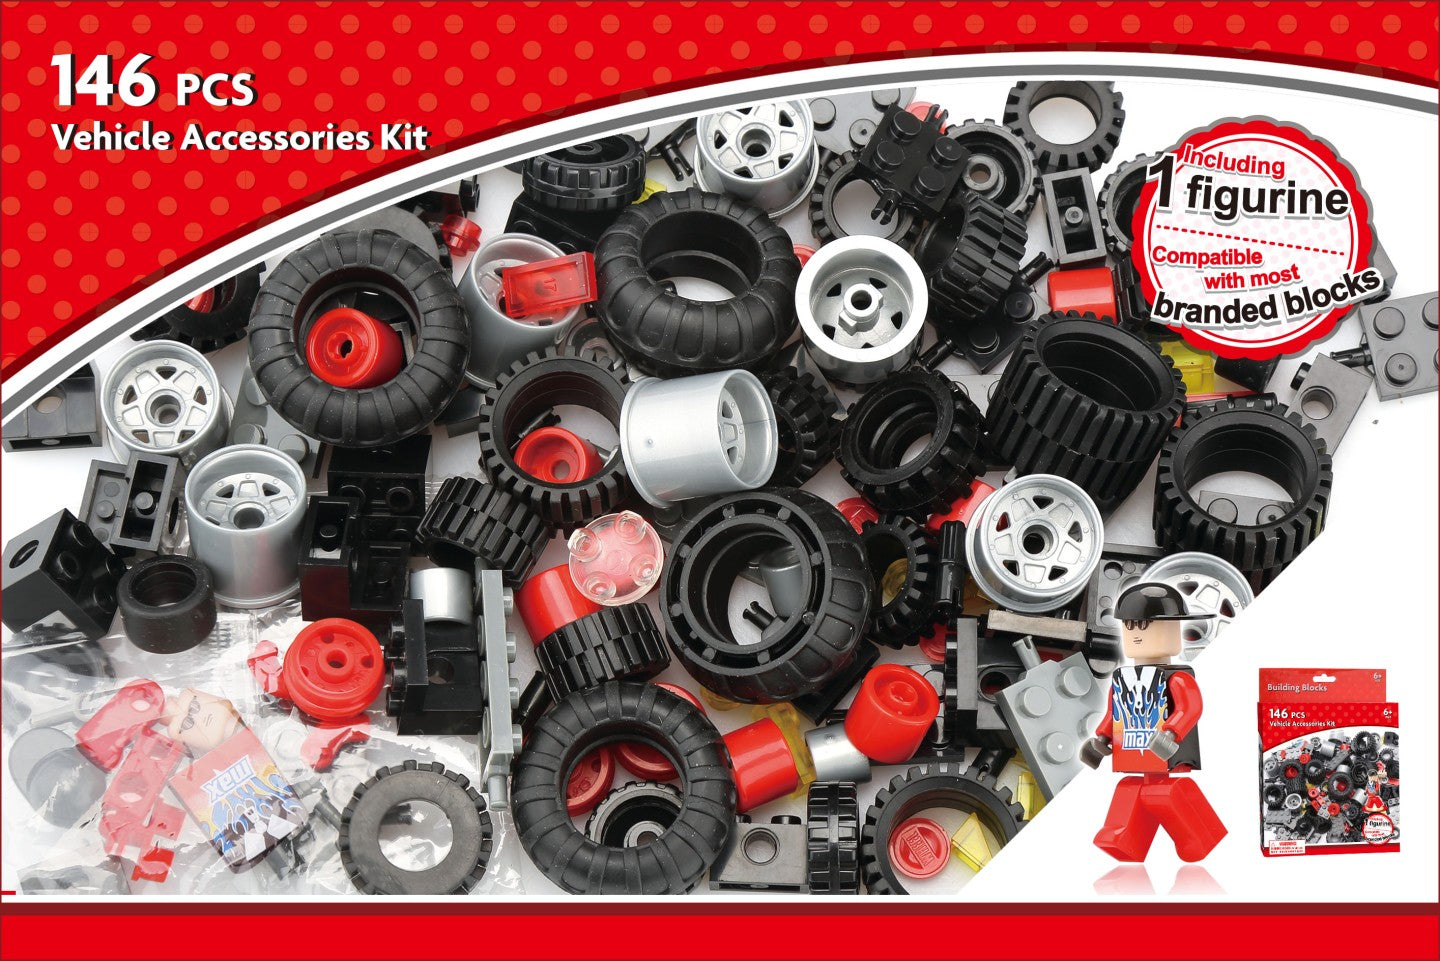 146pc Vehicle Accessories Kit including 1 Figurine